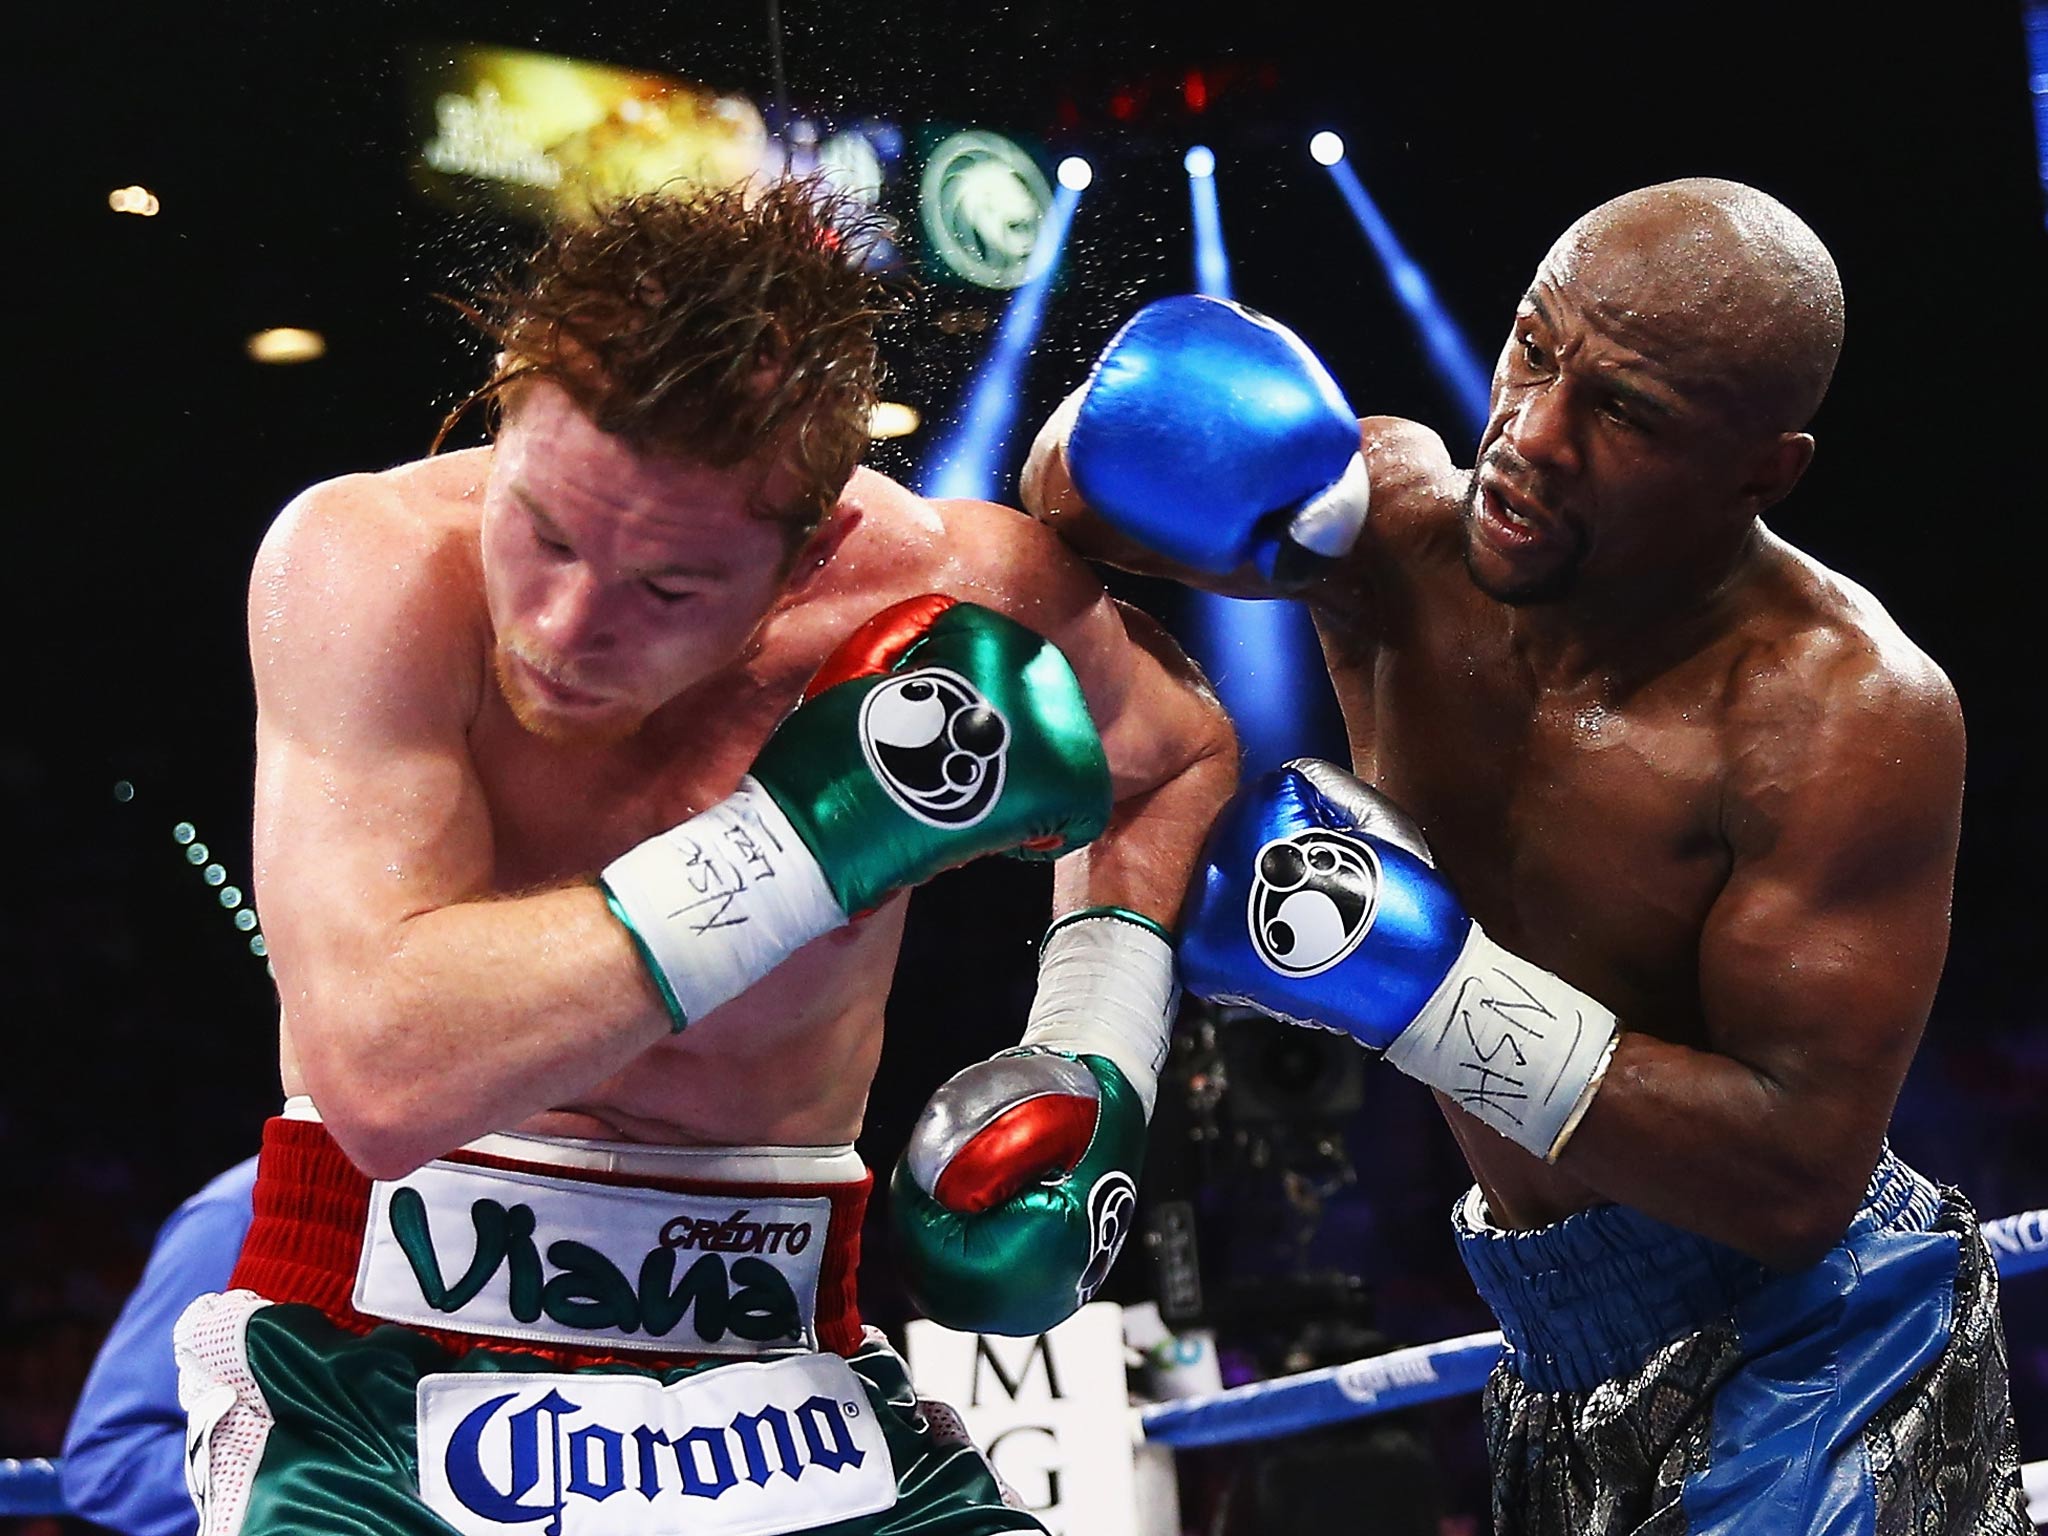 &#13;
Alvarez's only defeat came at the hands of Floyd Mayweather&#13;